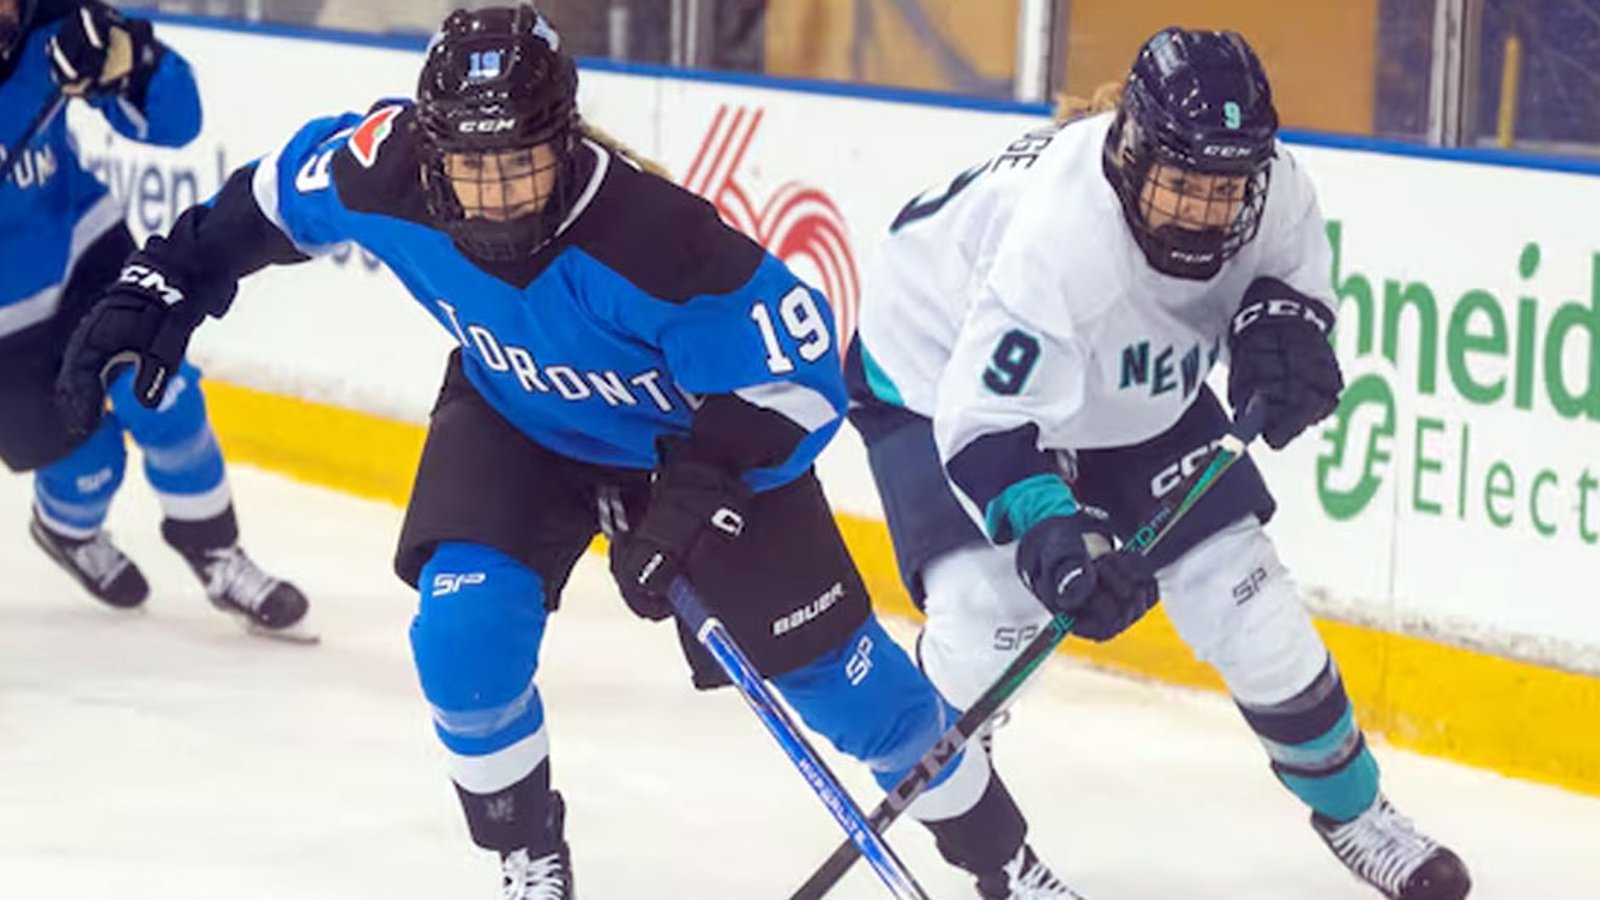 PWHL forced to move one of its teams already